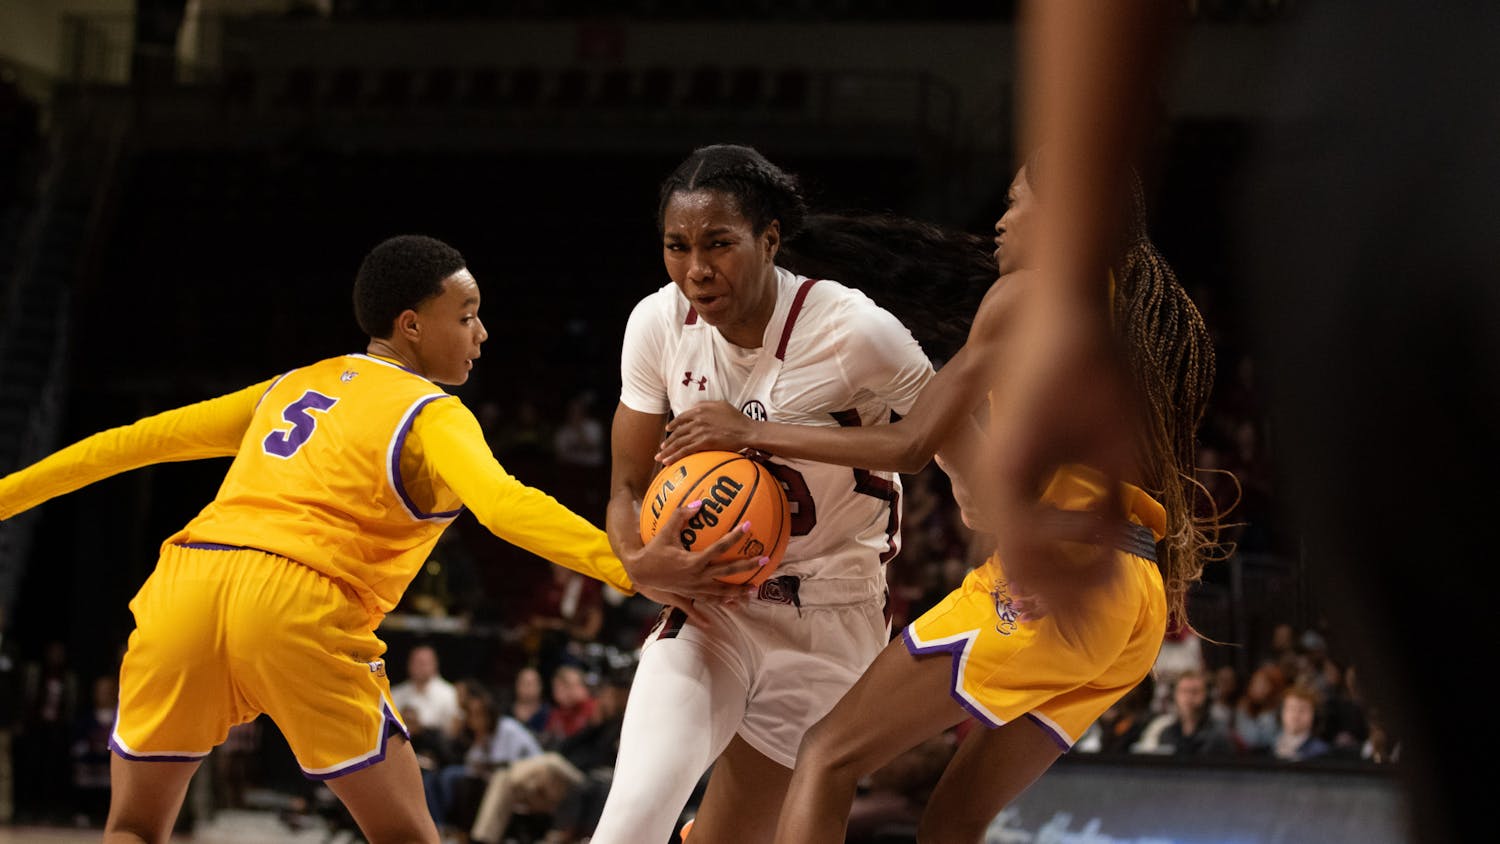 Sophomore guard Bree Hall gets fouled during the exhibition game against Benedict College at Colonial Life Arena on Oct. 31, 2022. The women’s basketball team went home with a dominant victory in its preseason exhibition match.